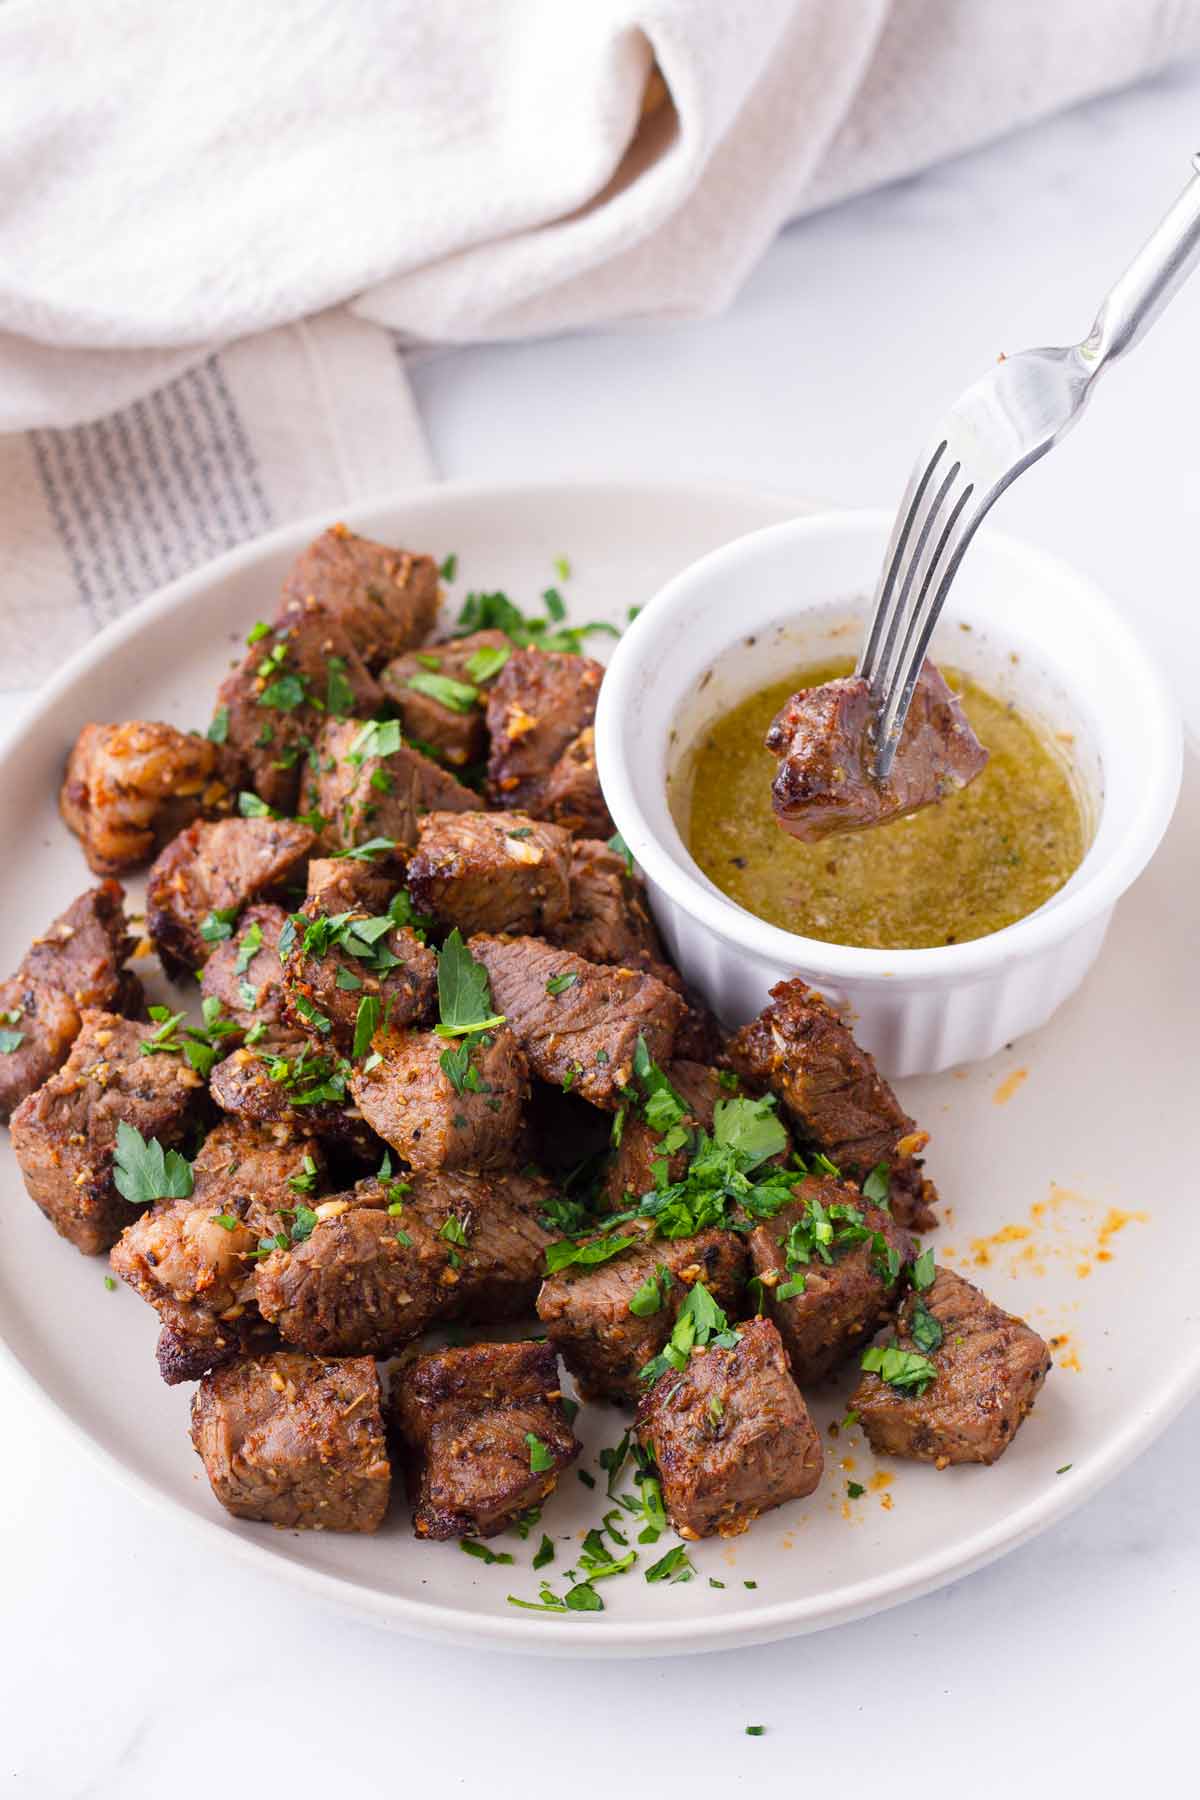 dipping steak bites into melted garlic butter